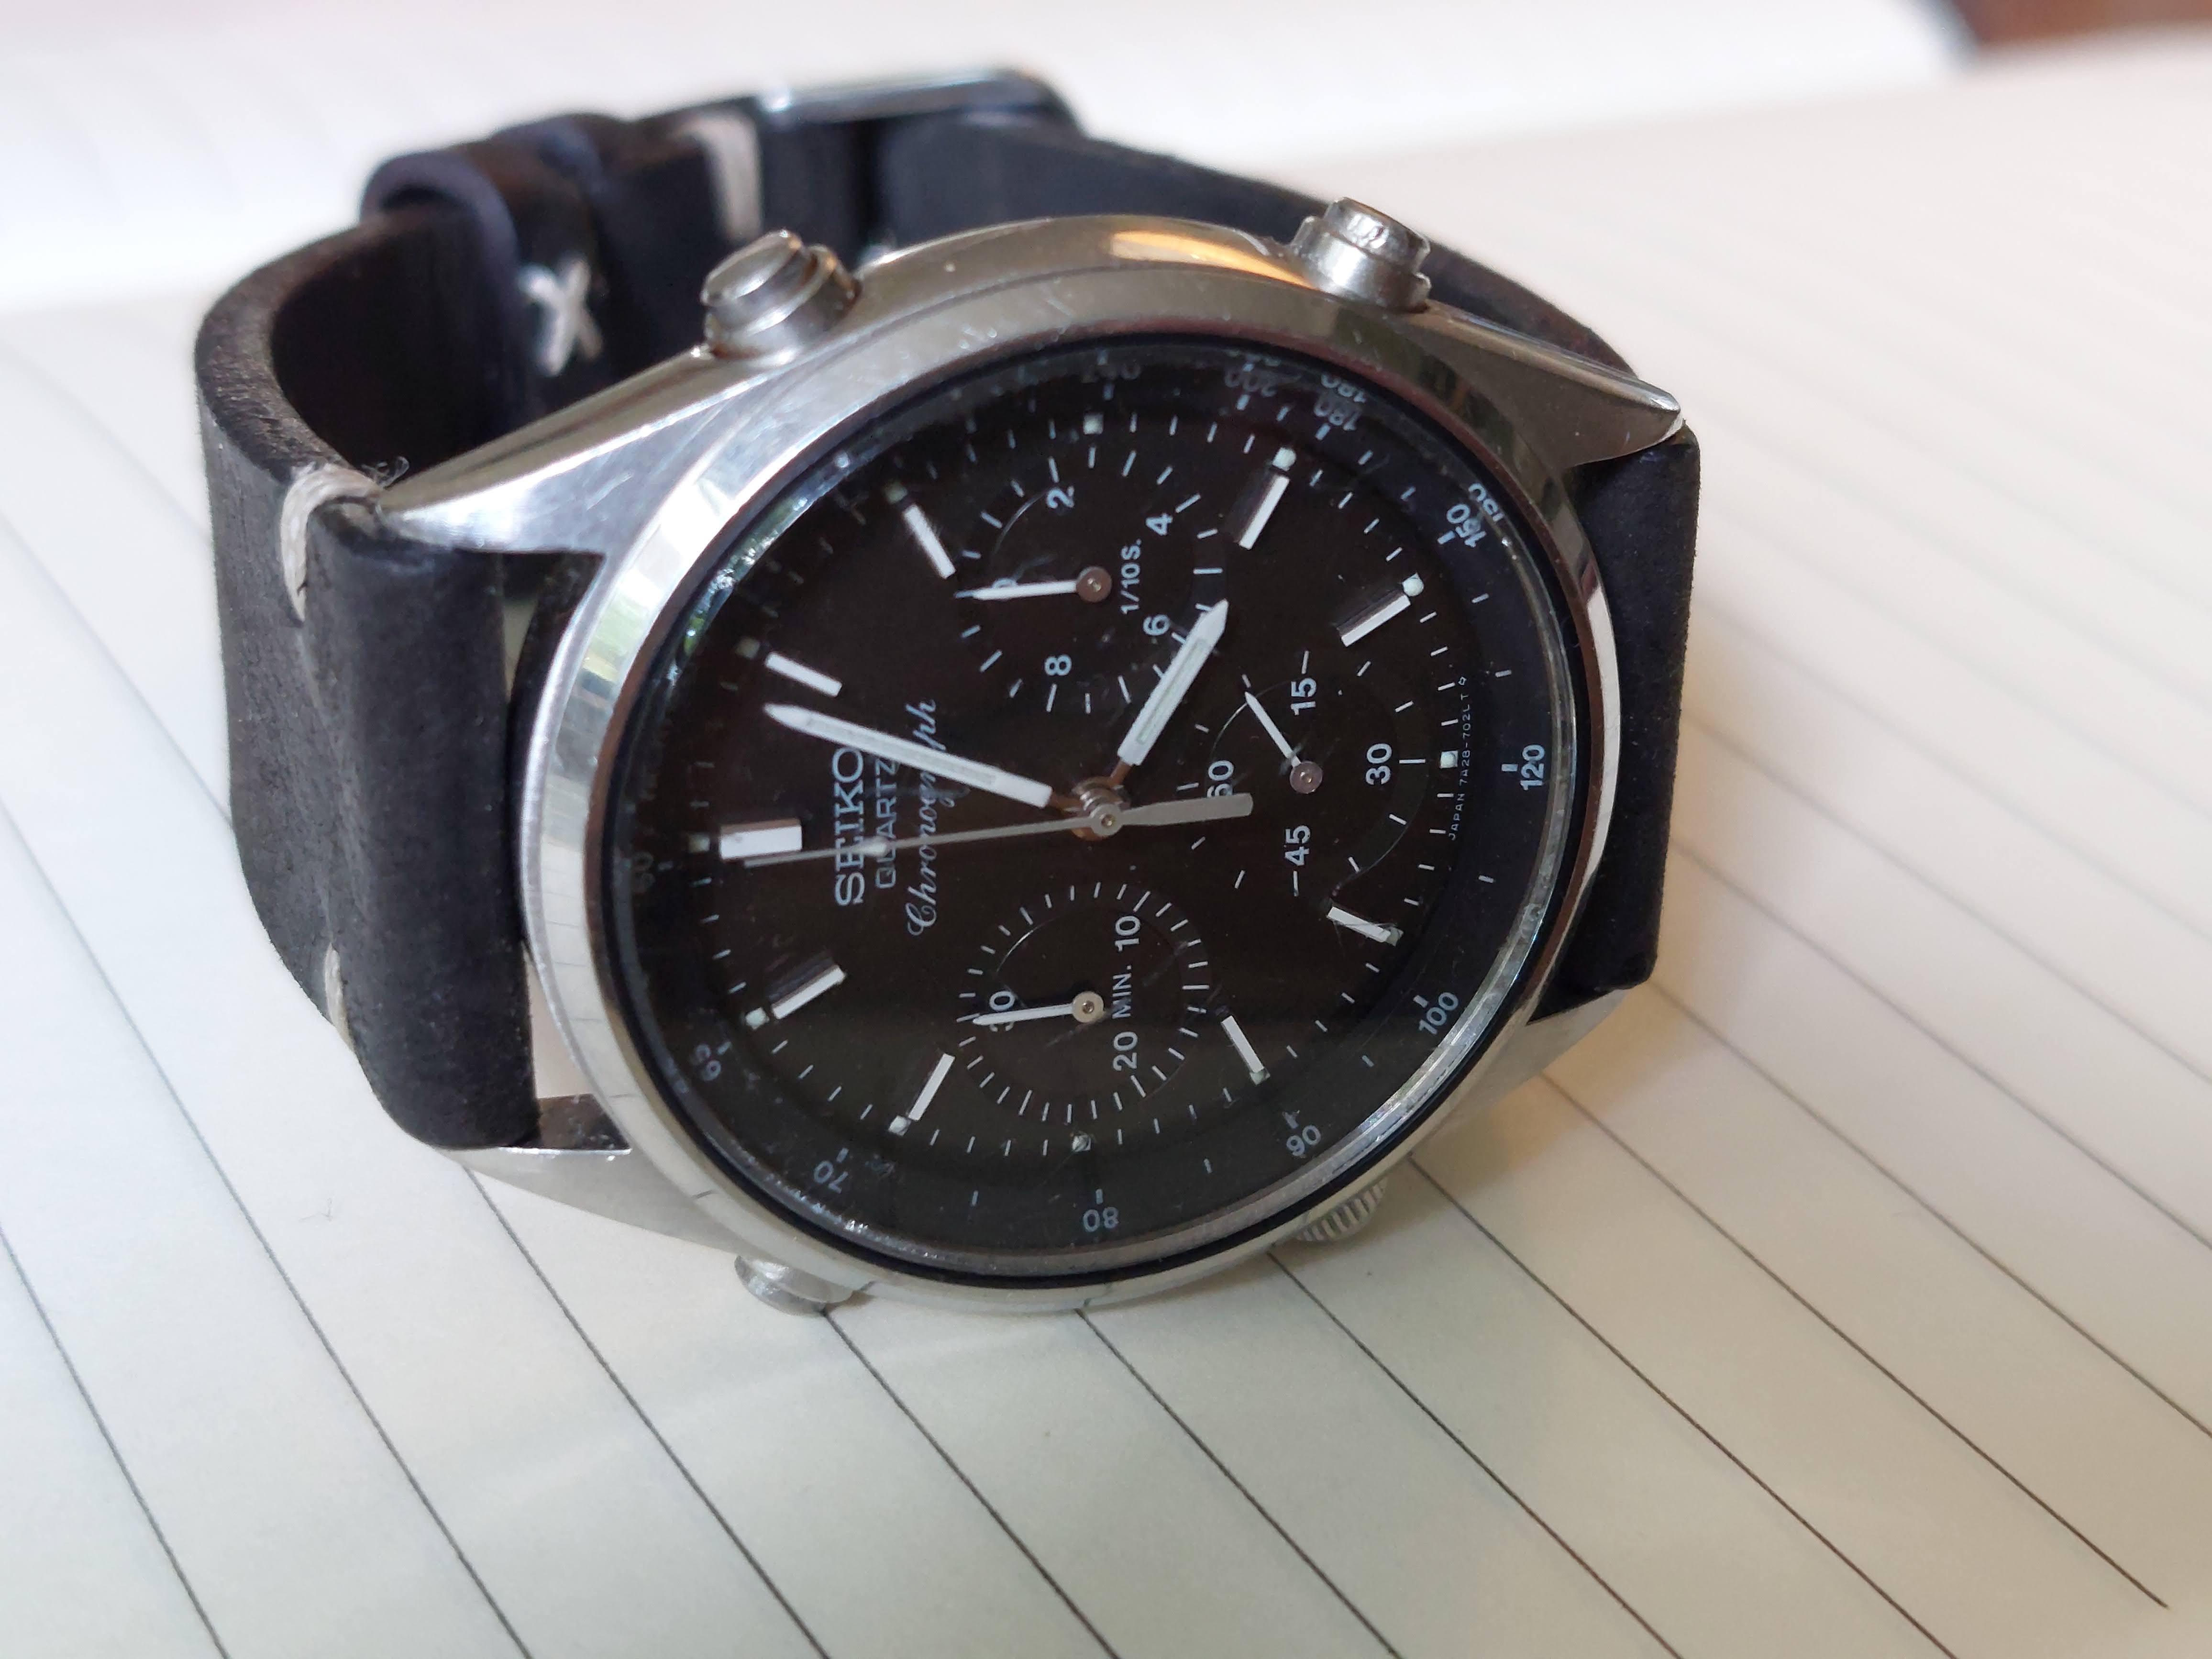 Seiko Vintage 7A28-702A James Bond (black) In Great Condition For €780 For  Sale From A Private Seller On Chrono24 